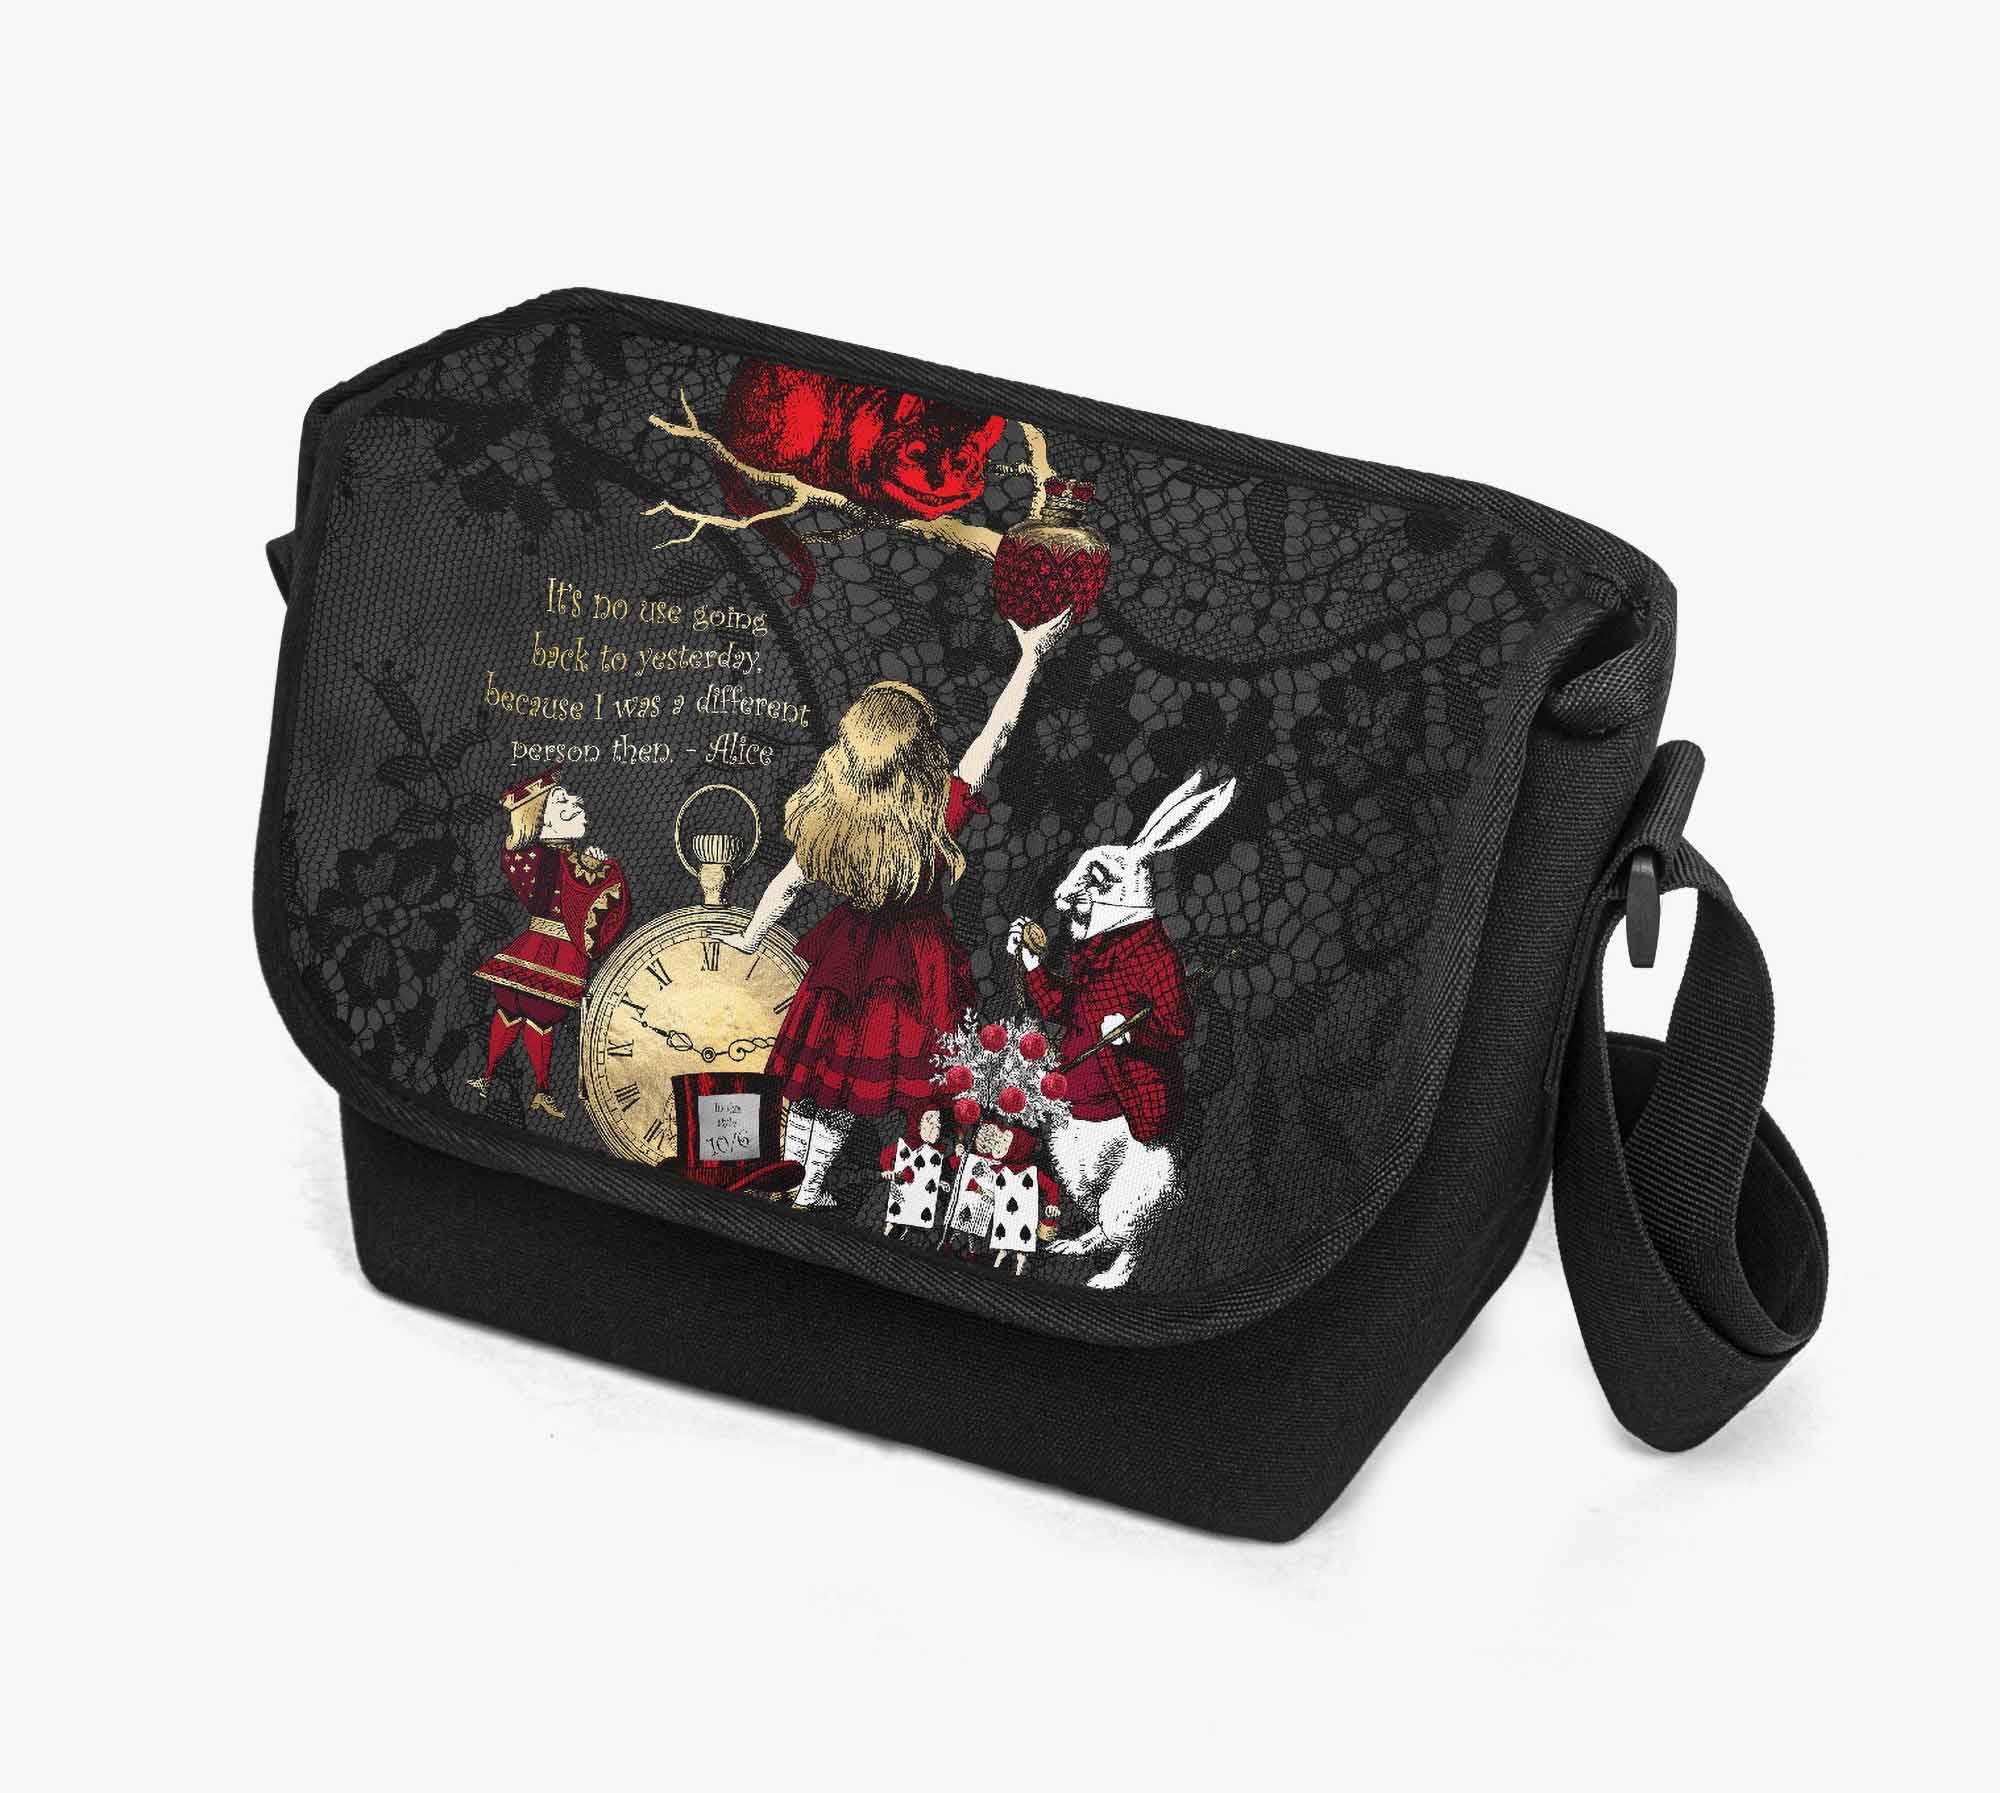 Laptop Sleeve-Alice in Wonderland Gifts 52 Classic Series – ACES INFINITY